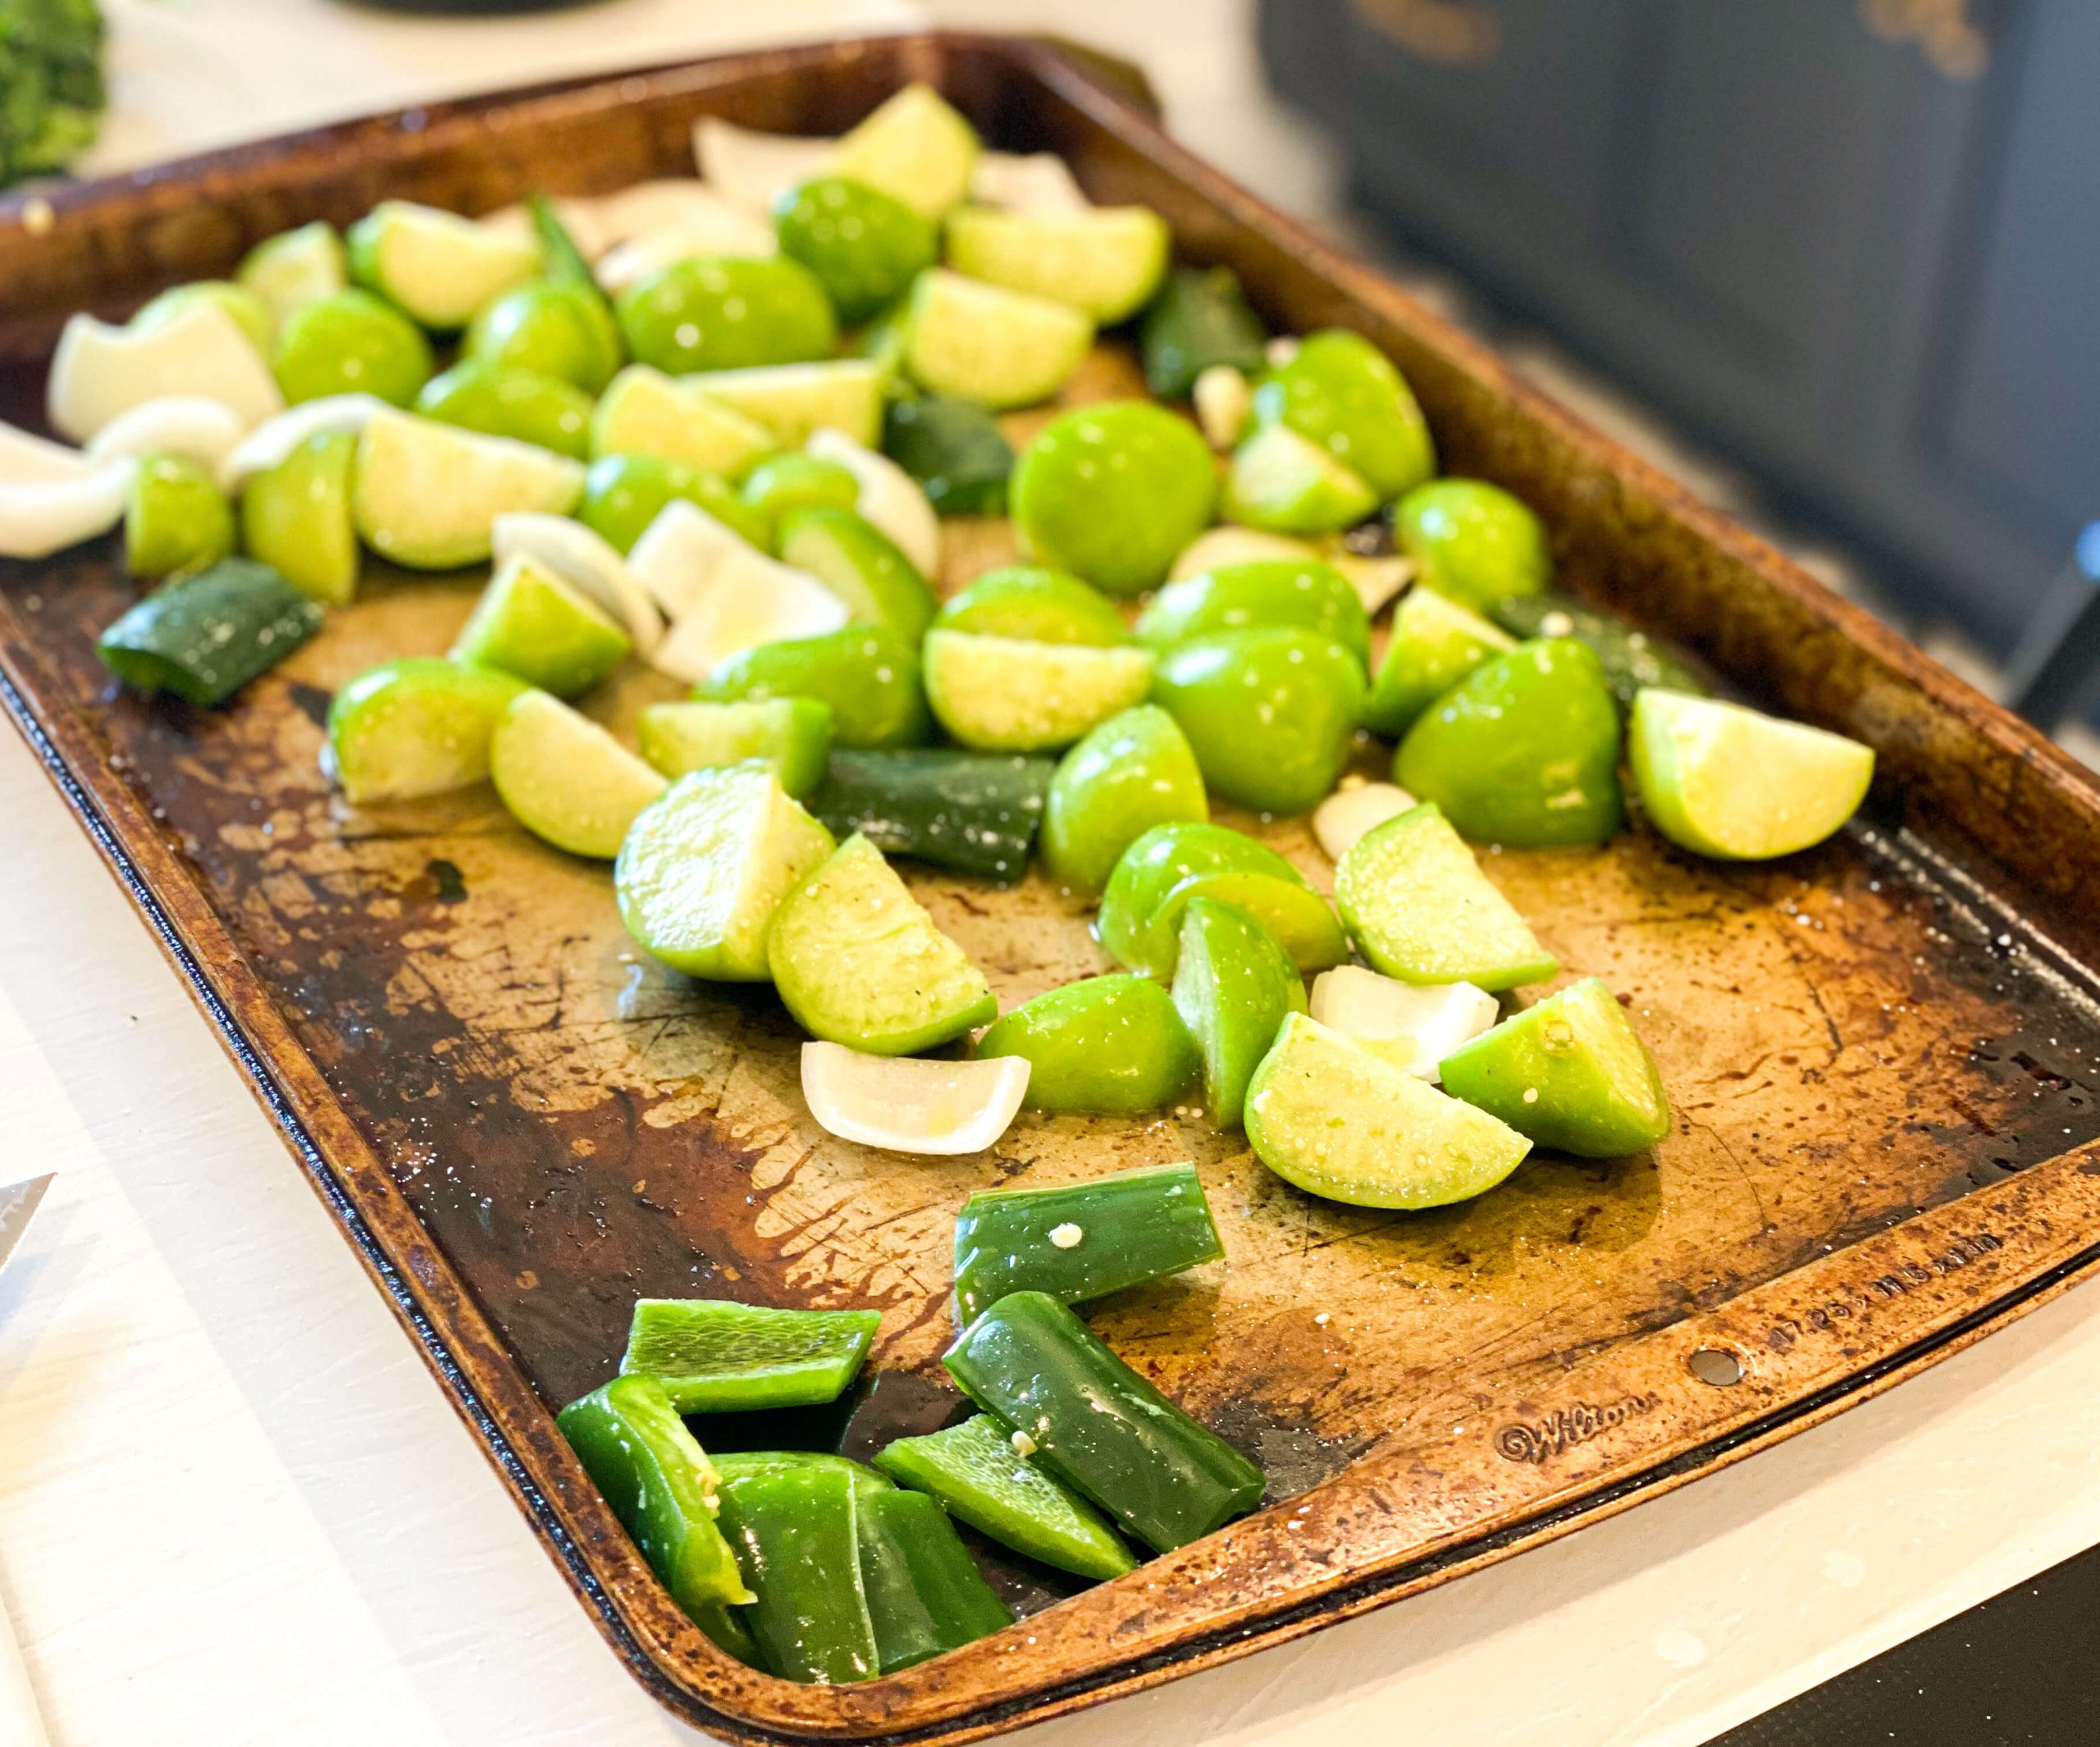 Tomatillo and vegetables ready to bake 